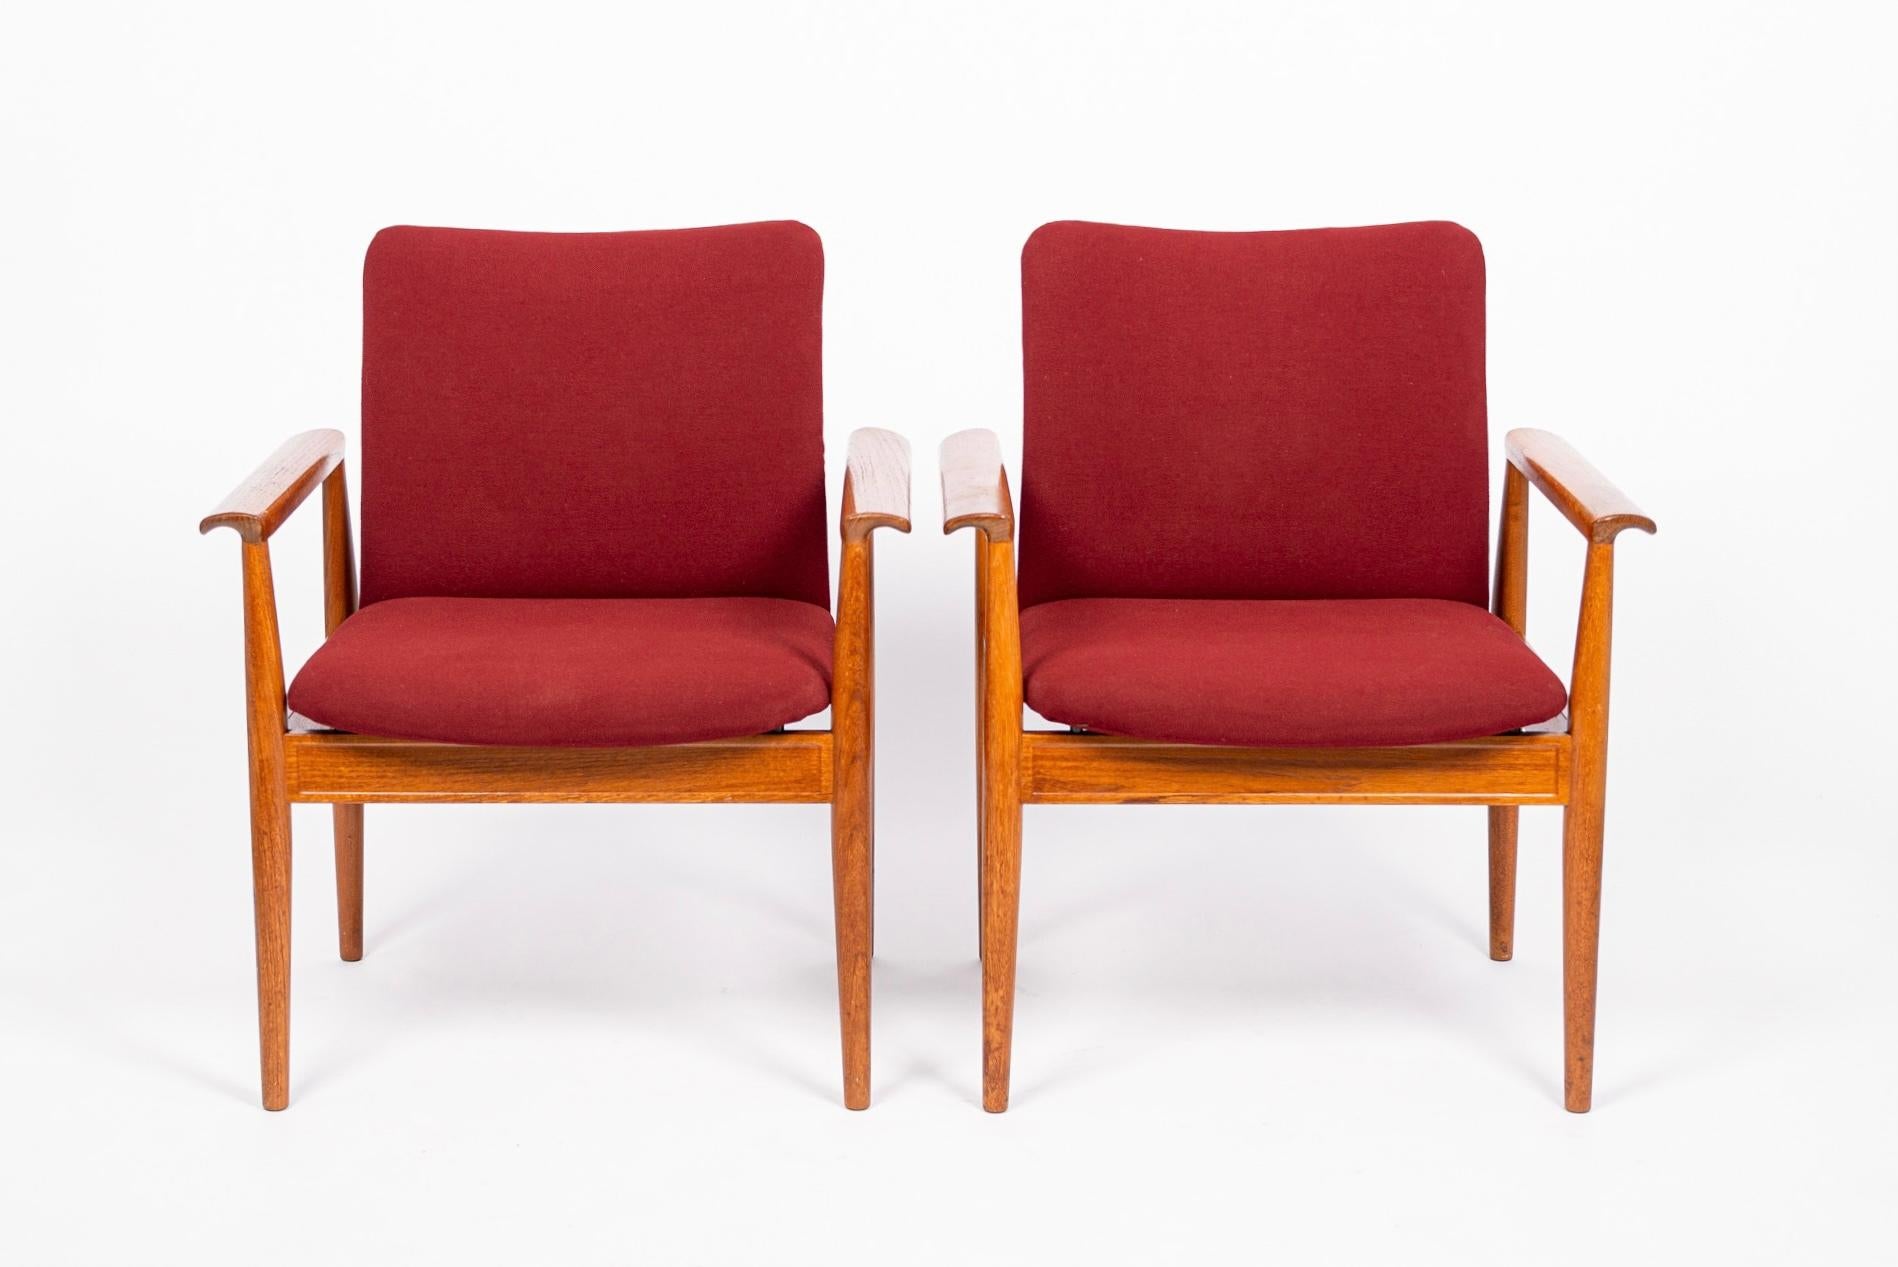 These gorgeous vintage mid century modern Model 209 Diplomat chairs were designed by Finn Juhl in the 1960s and manufactured by France & Daverkosen. This sophisticated pair of chairs are expertly crafted from solid teak wood with original upholstery